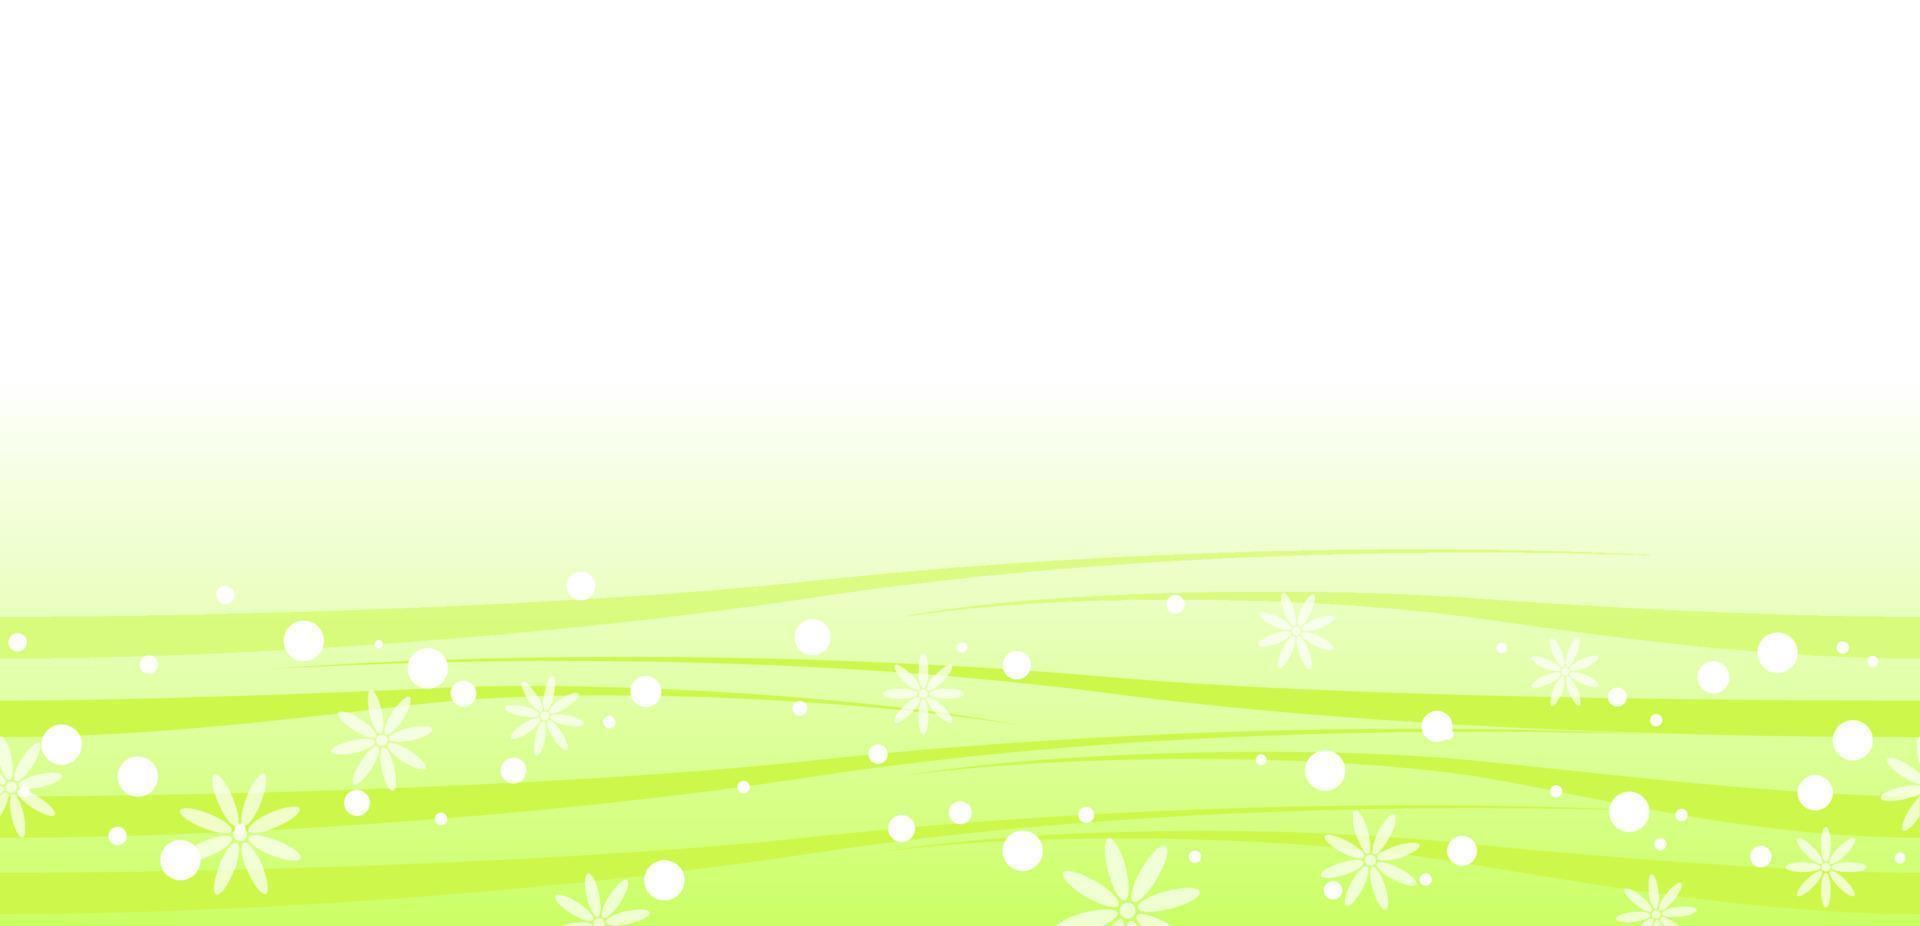 Vector Seamless Abstract Spring Background Illustration With Text Space Isolated On A White Background. Horizontally Repeatable.